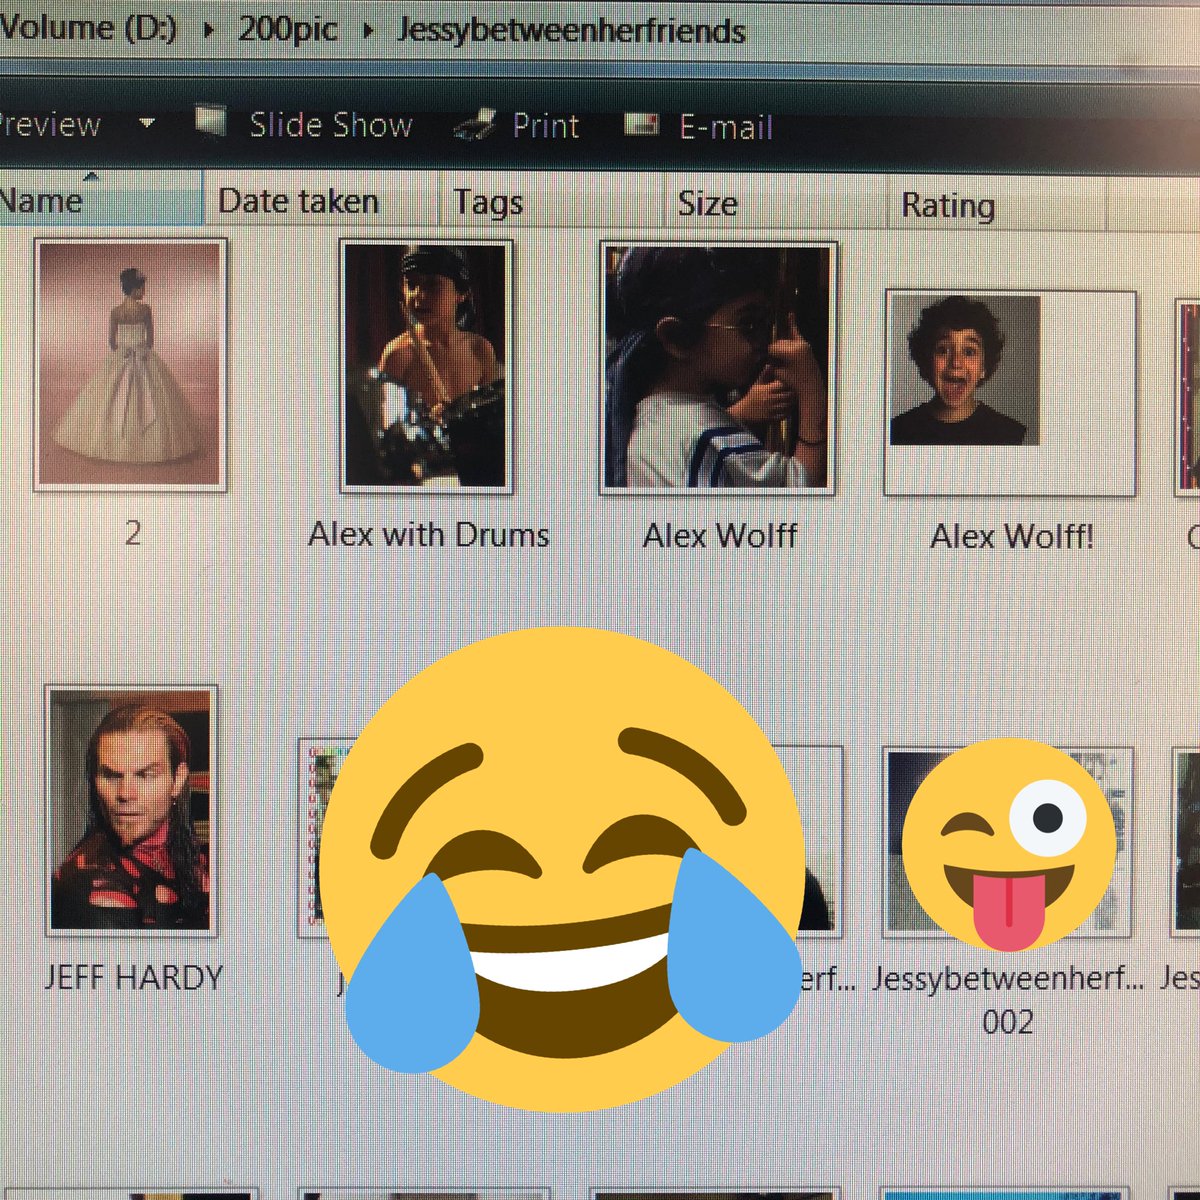 going through an old hard drive and tell me why I have photos saved of Alex Wolff & Jeff hardy dnsknesksk https://t.co/SXJyaSM6y1